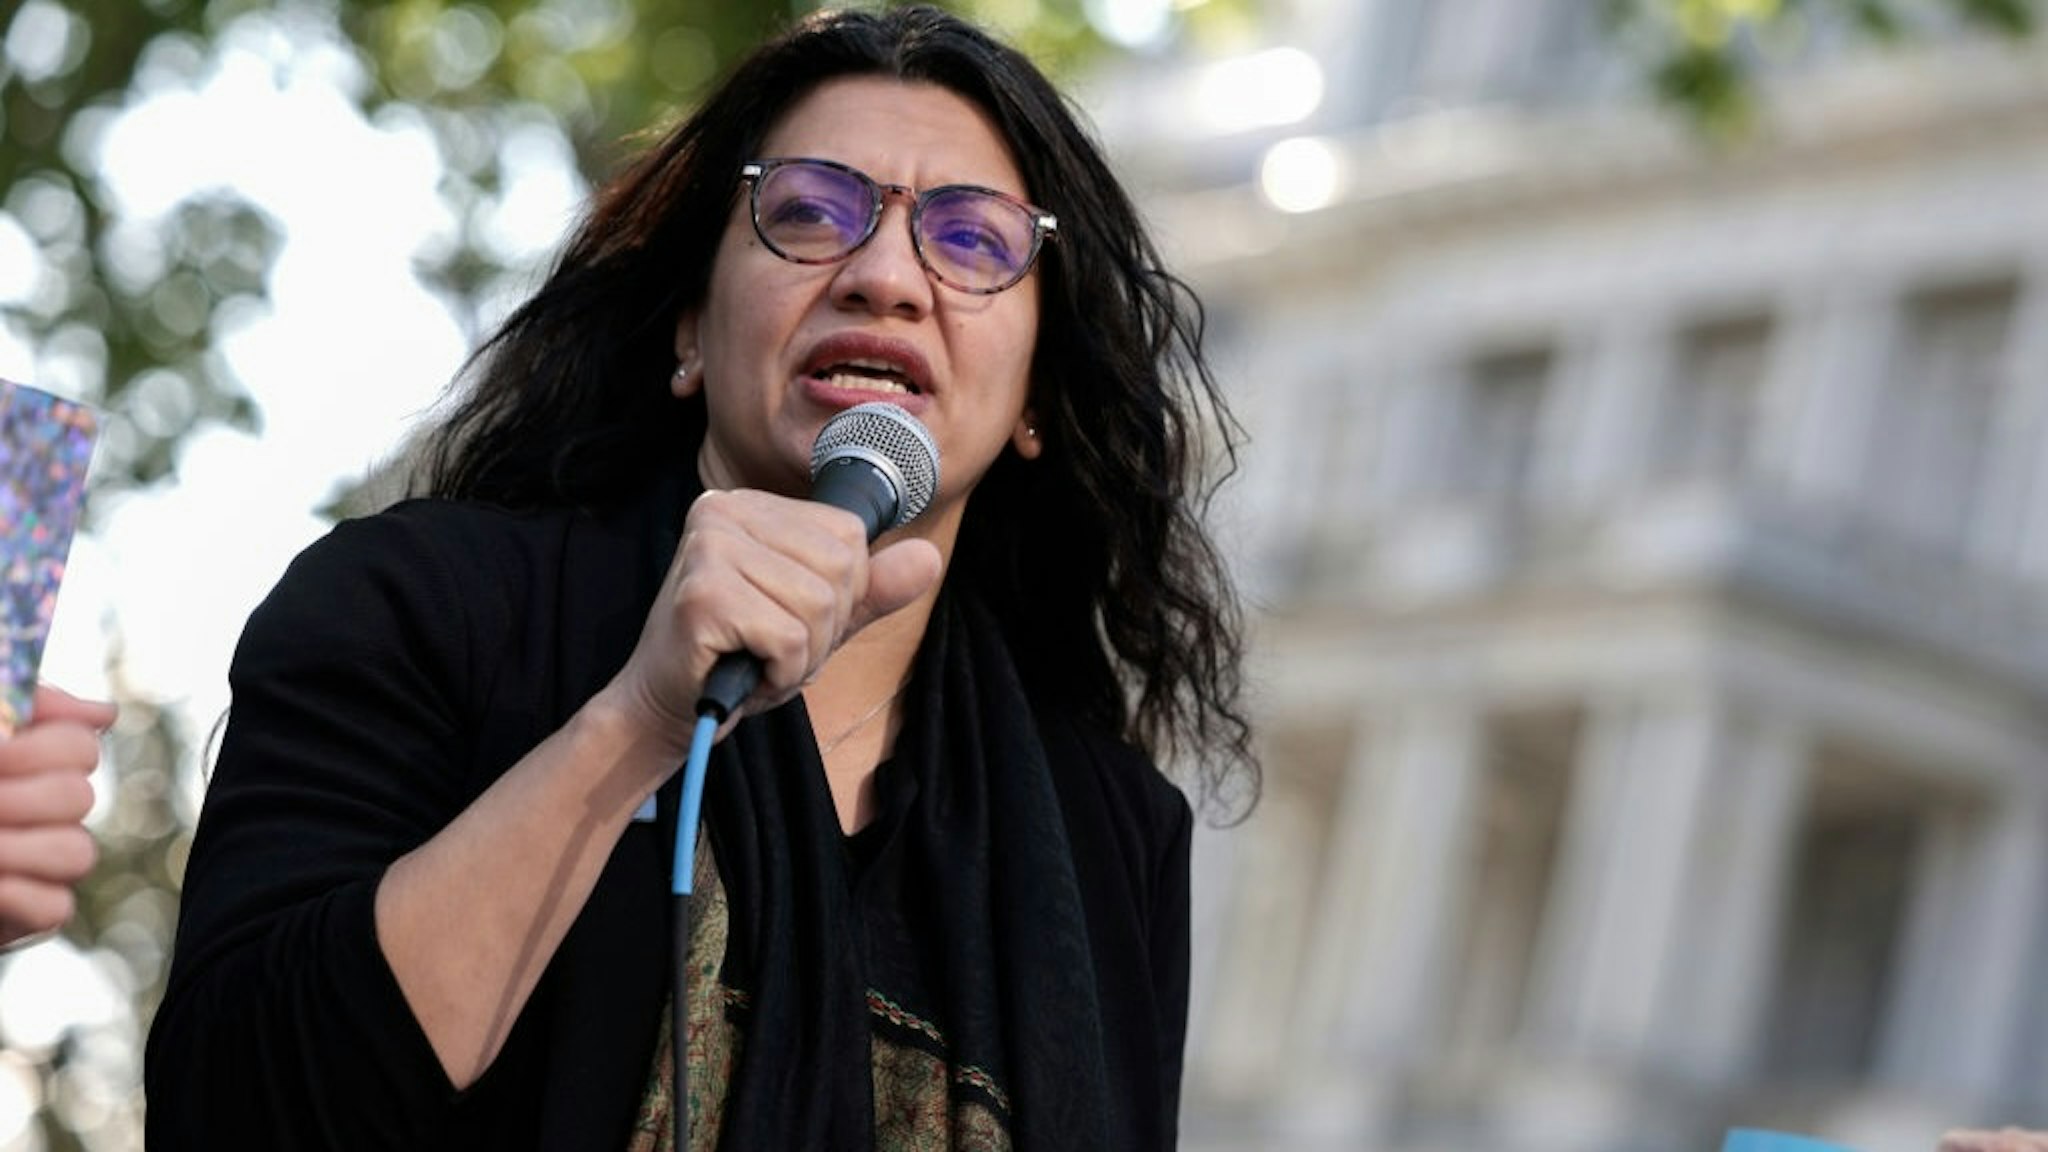 WASHINGTON, DC - APRIL 27: Rep. Rashida Tlaib (D-MI) speaks at a Student Loan Forgiveness rally on Pennsylvania Avenue and 17th street near the White House on April 27, 2022 in Washington, DC. Student loan activists including college students held the rally to celebrate U.S. President Joe Biden's extension of the pause on student loans and also urge him to sign an executive order that would fully cancel all student debt.